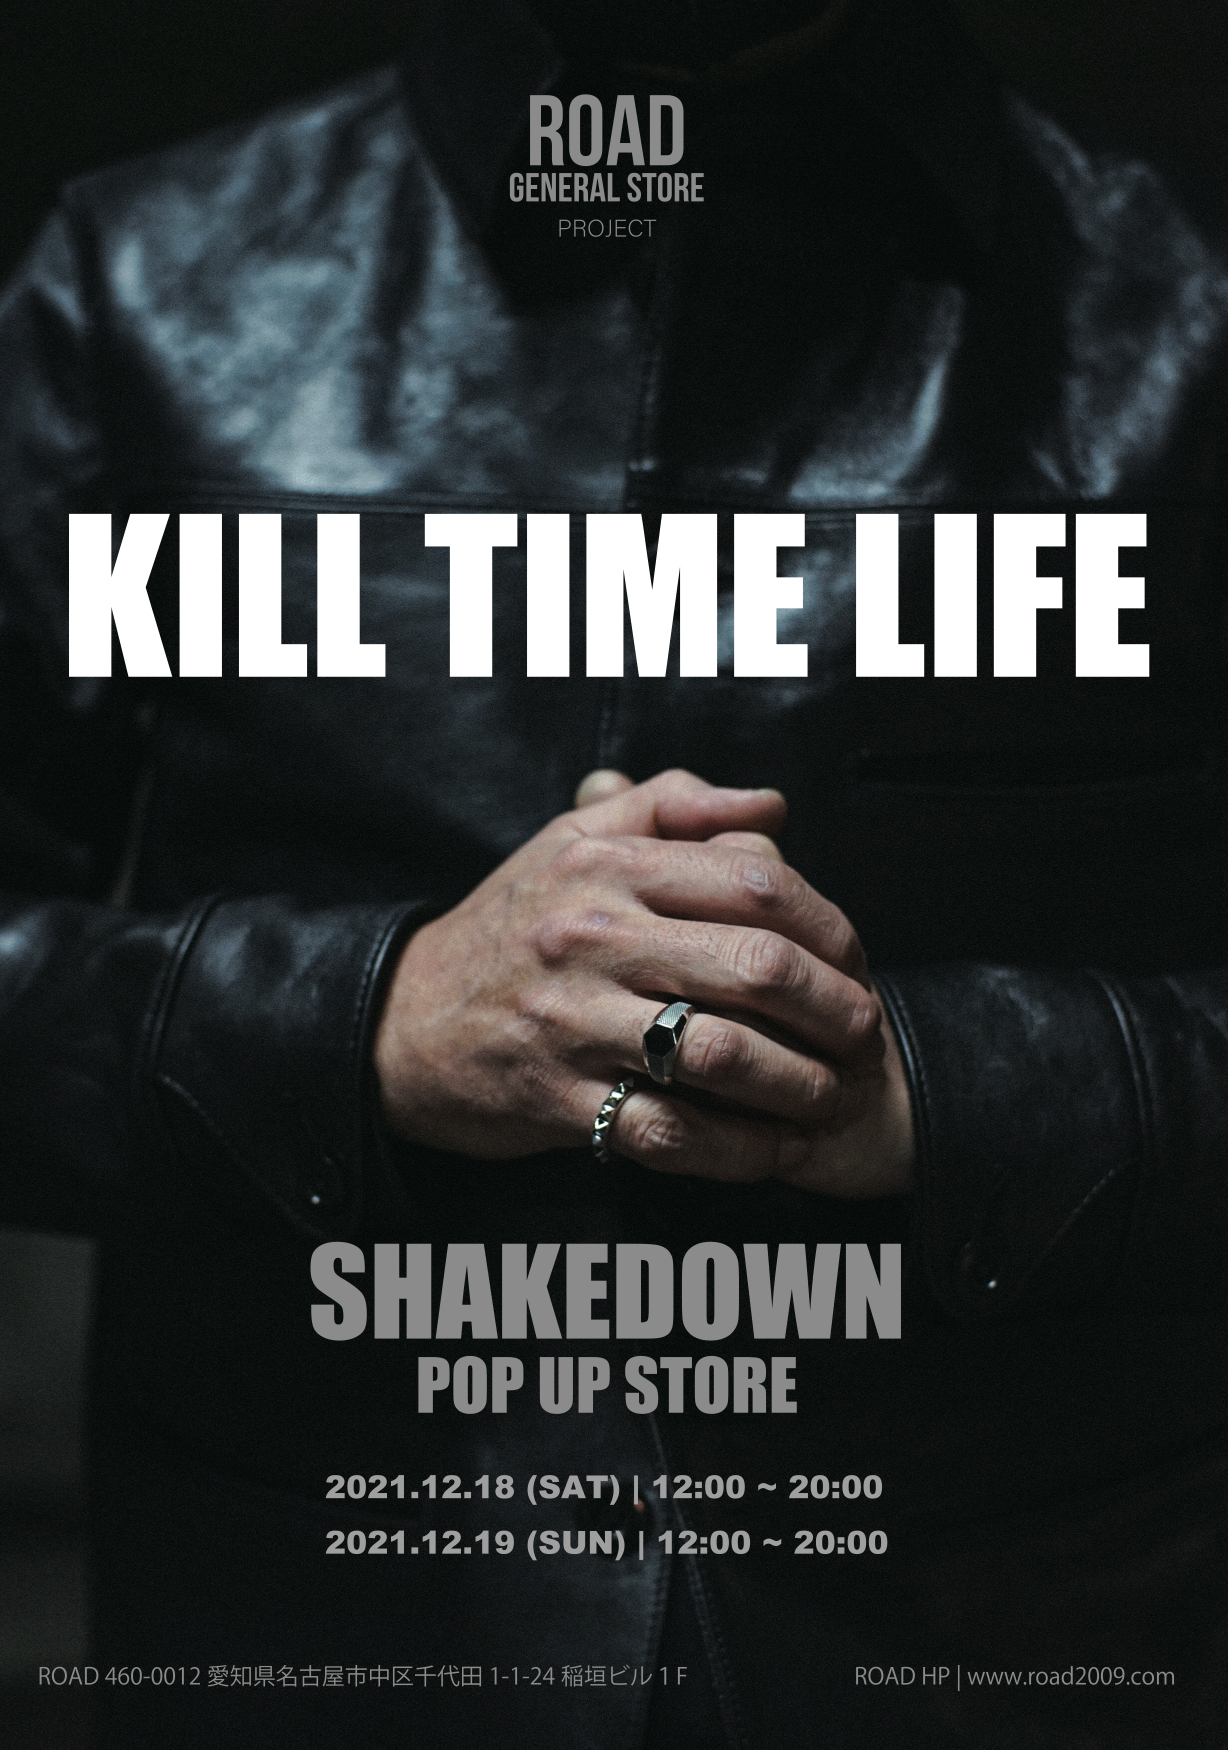 「SHAKE DOWN」“KILL TIME LIFE POP UP STORE” 開催